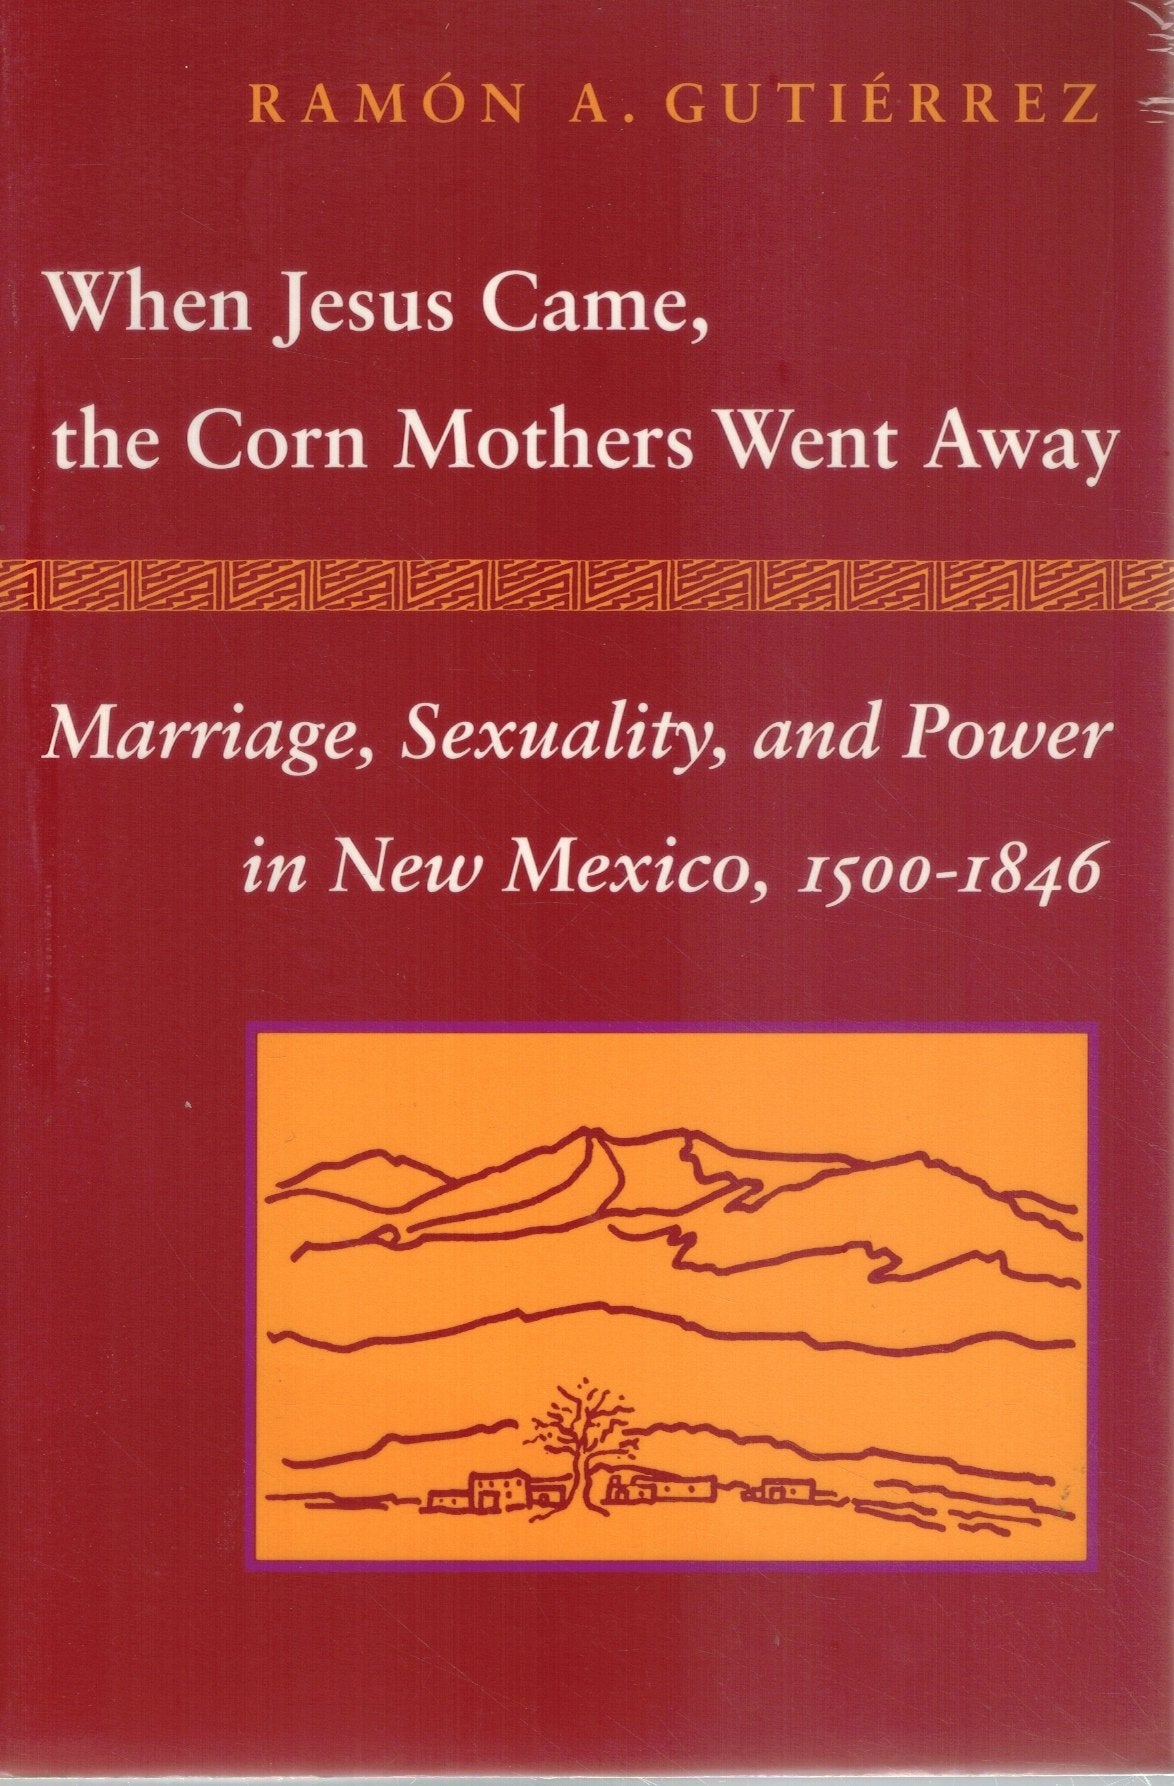 WHEN JESUS CAME, THE CORN MOTHERS WENT AWAY Marriage, Sexuality, and Power  in New Mexico, 1500-1846  by Gutierrez, Ramon A.